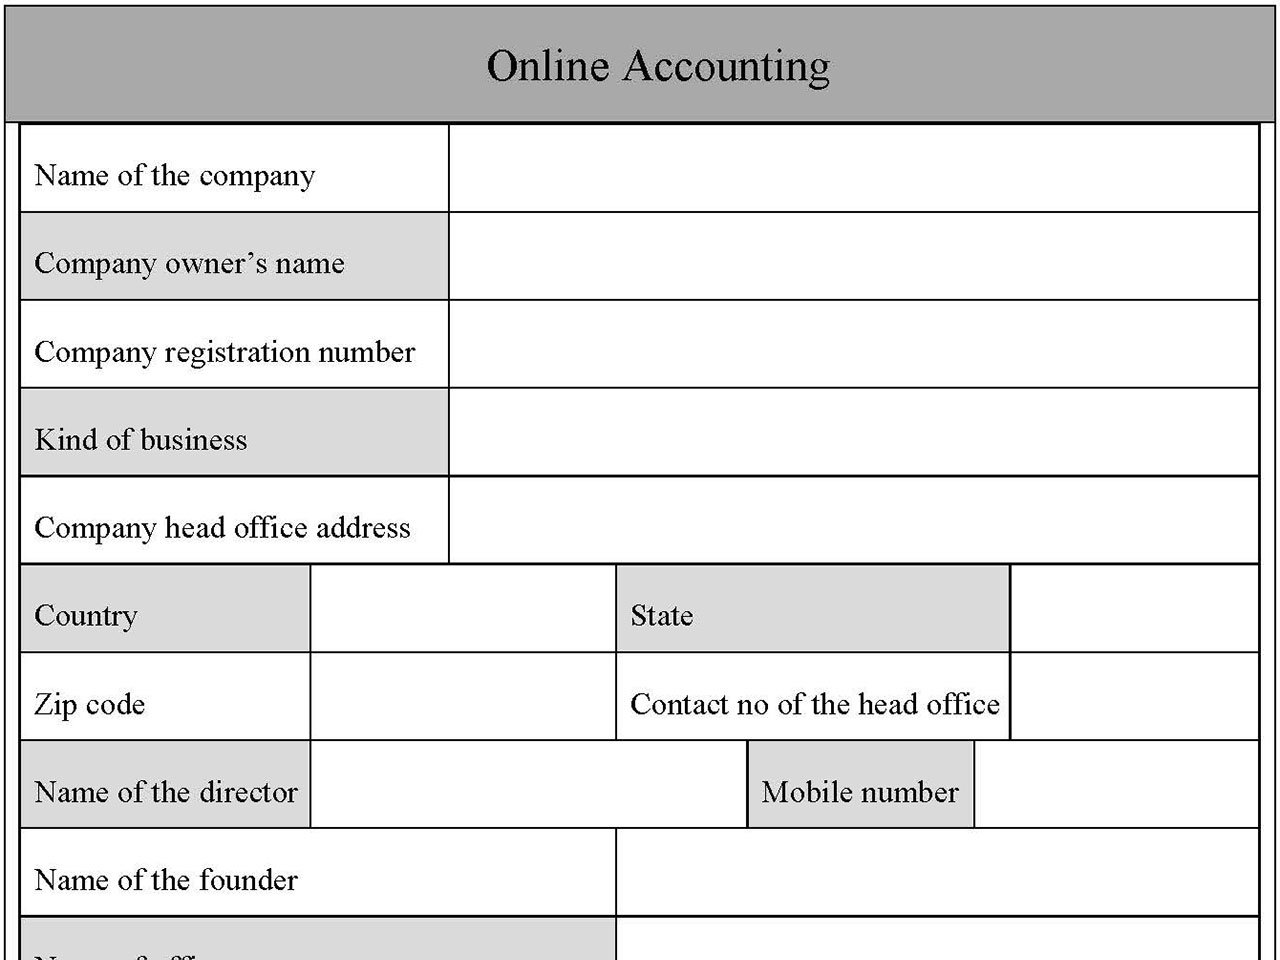 Online Accounting Form